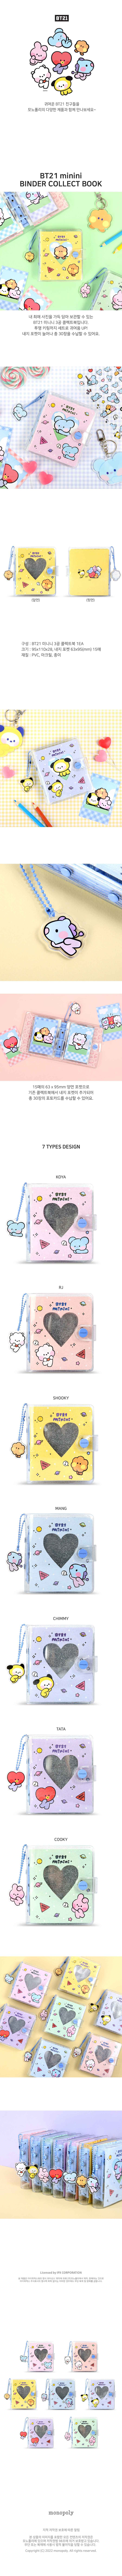 official-bt21-minini-binder-collect-book-wholesale